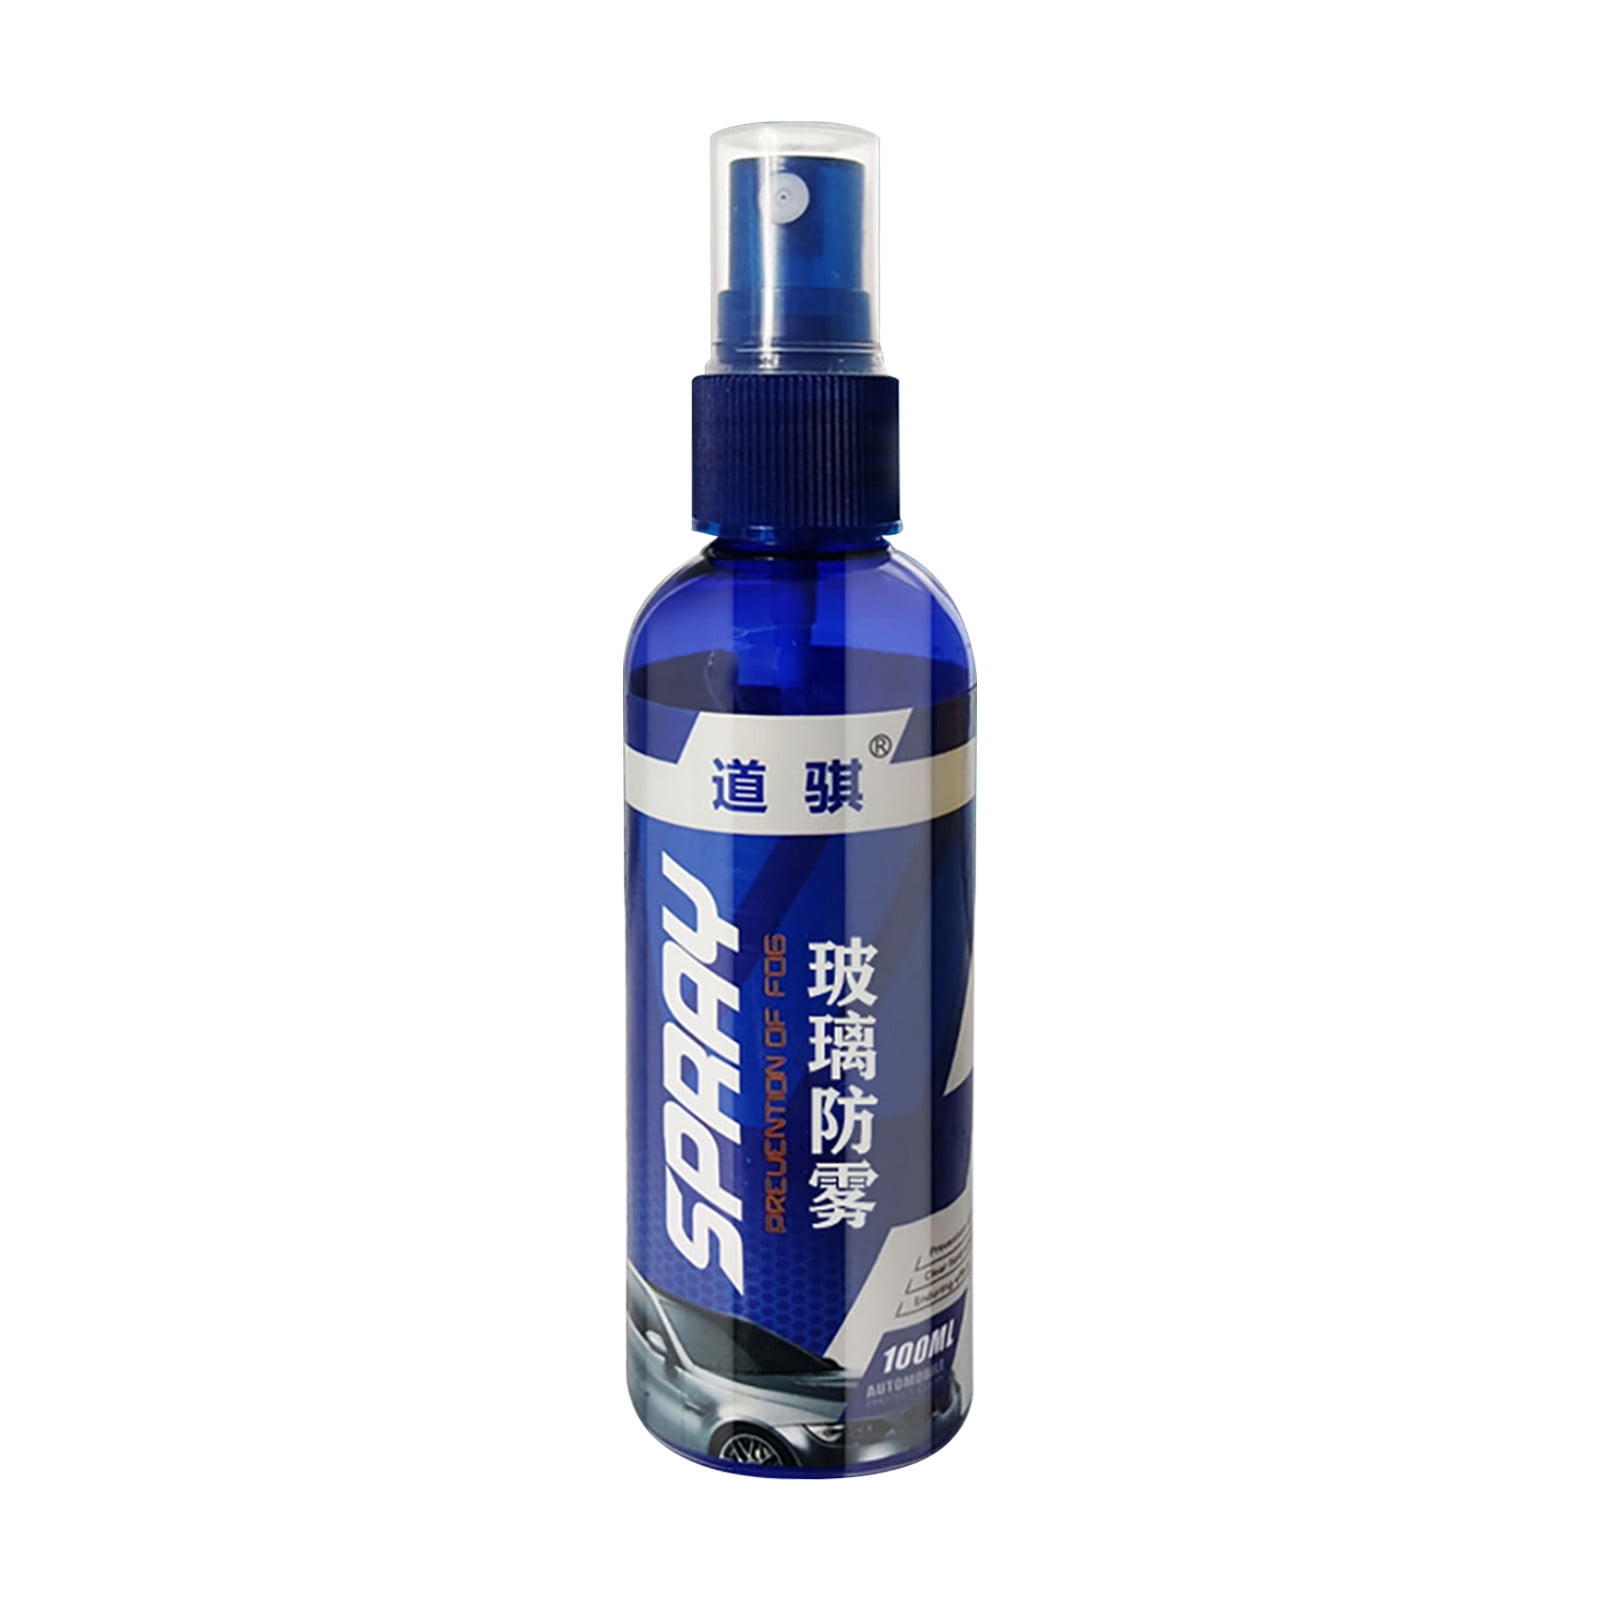 50ml Auto Windshield Water Repellent Anti-fog Agent Car Coating Windows  Waterproof Rainproof Anit-fog Spray Hydrophobic Coating - Price history &  Review, AliExpress Seller - Warming Car Parts Store